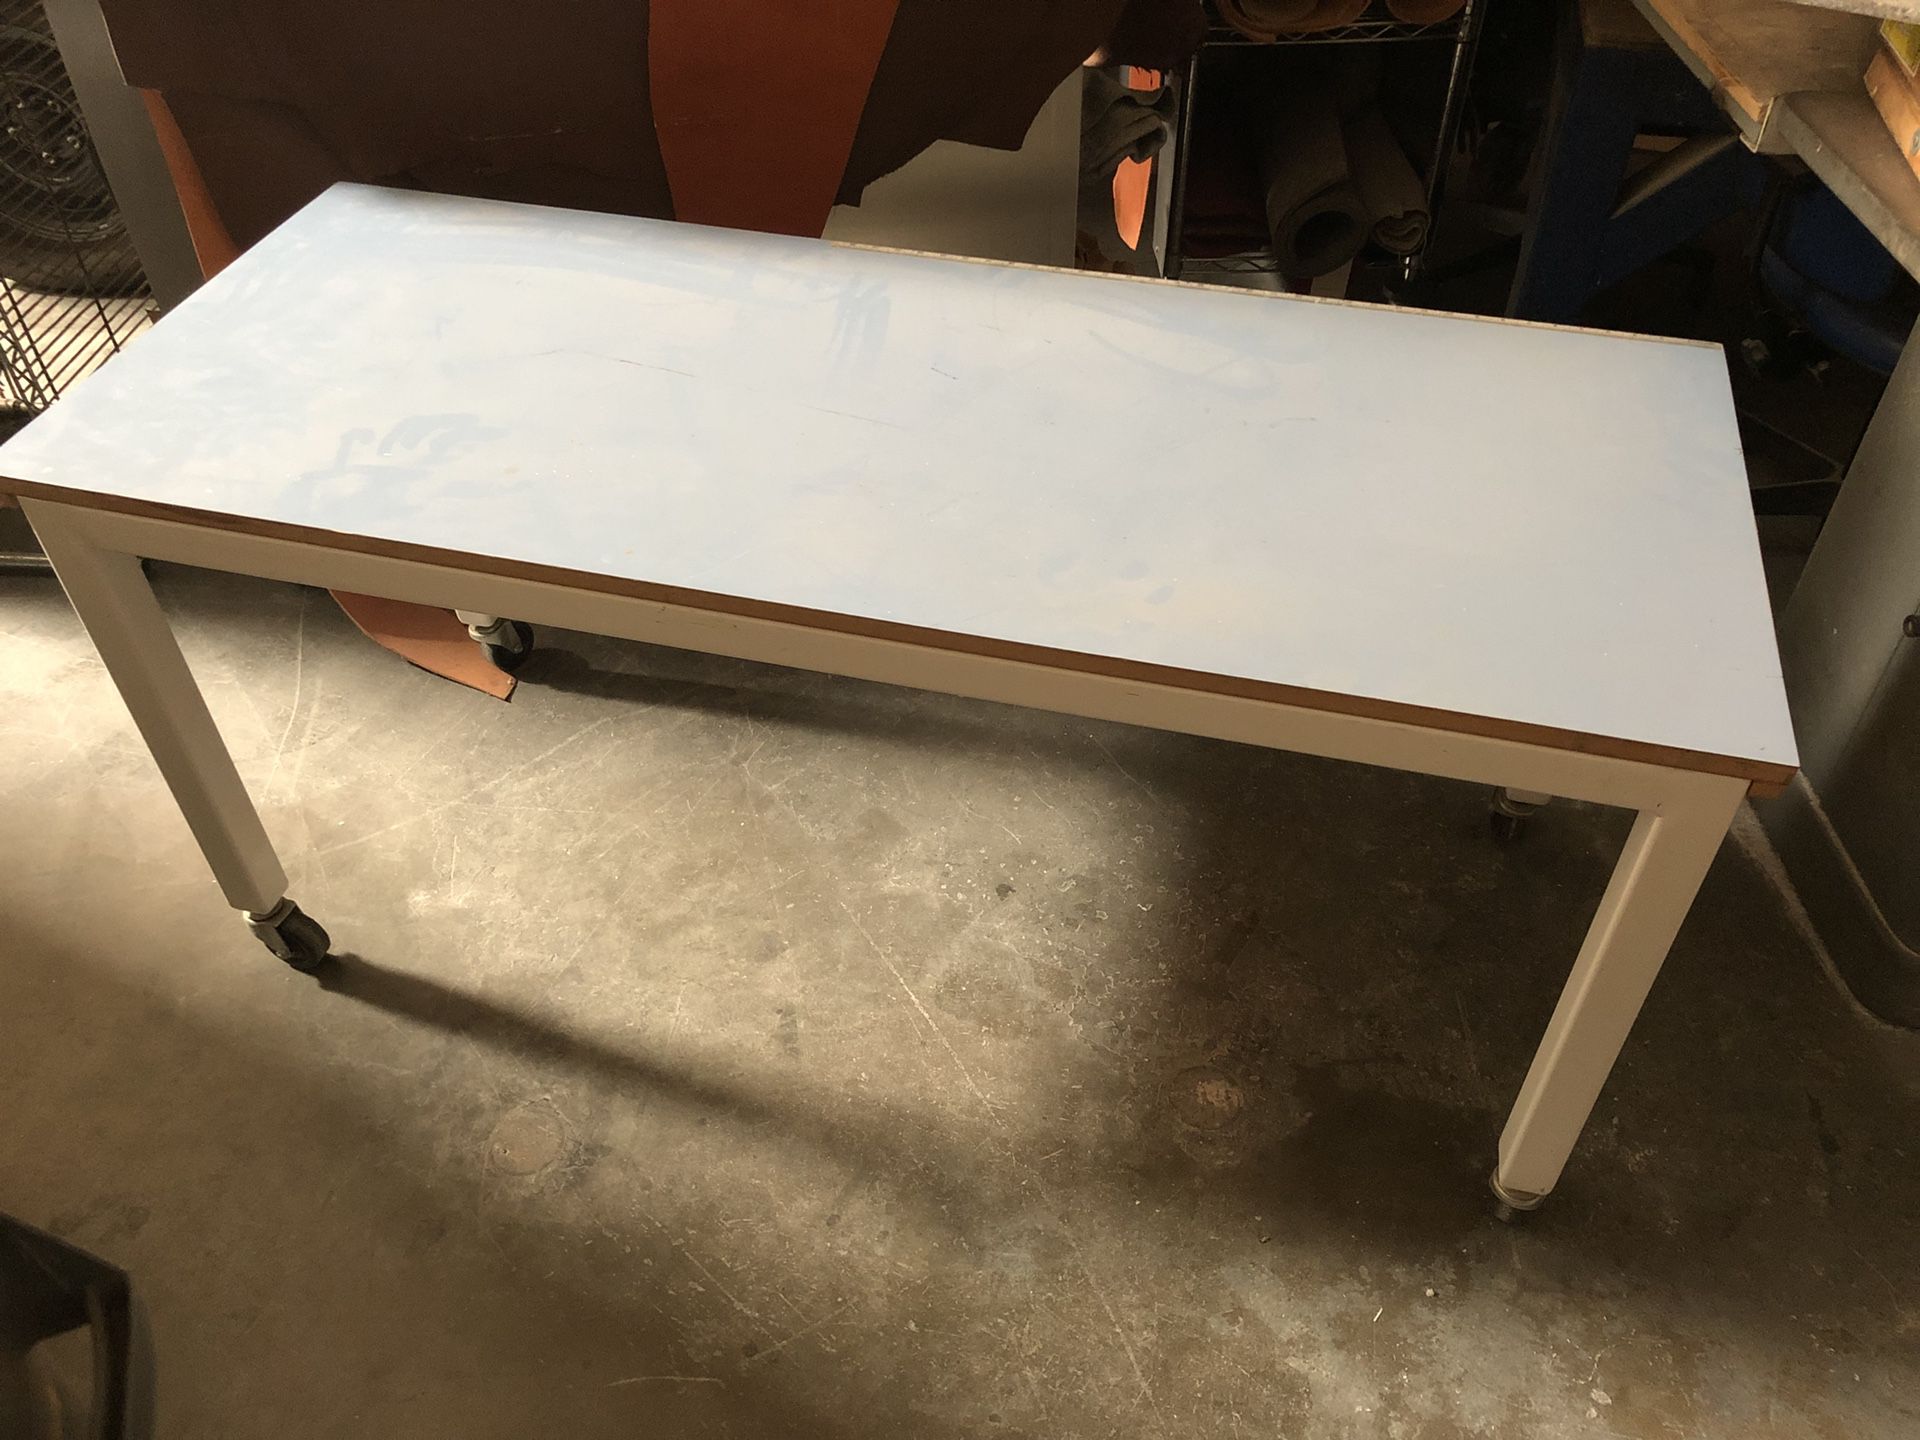 Workshop Table - Steel construction, very sturdy - Powdercoated